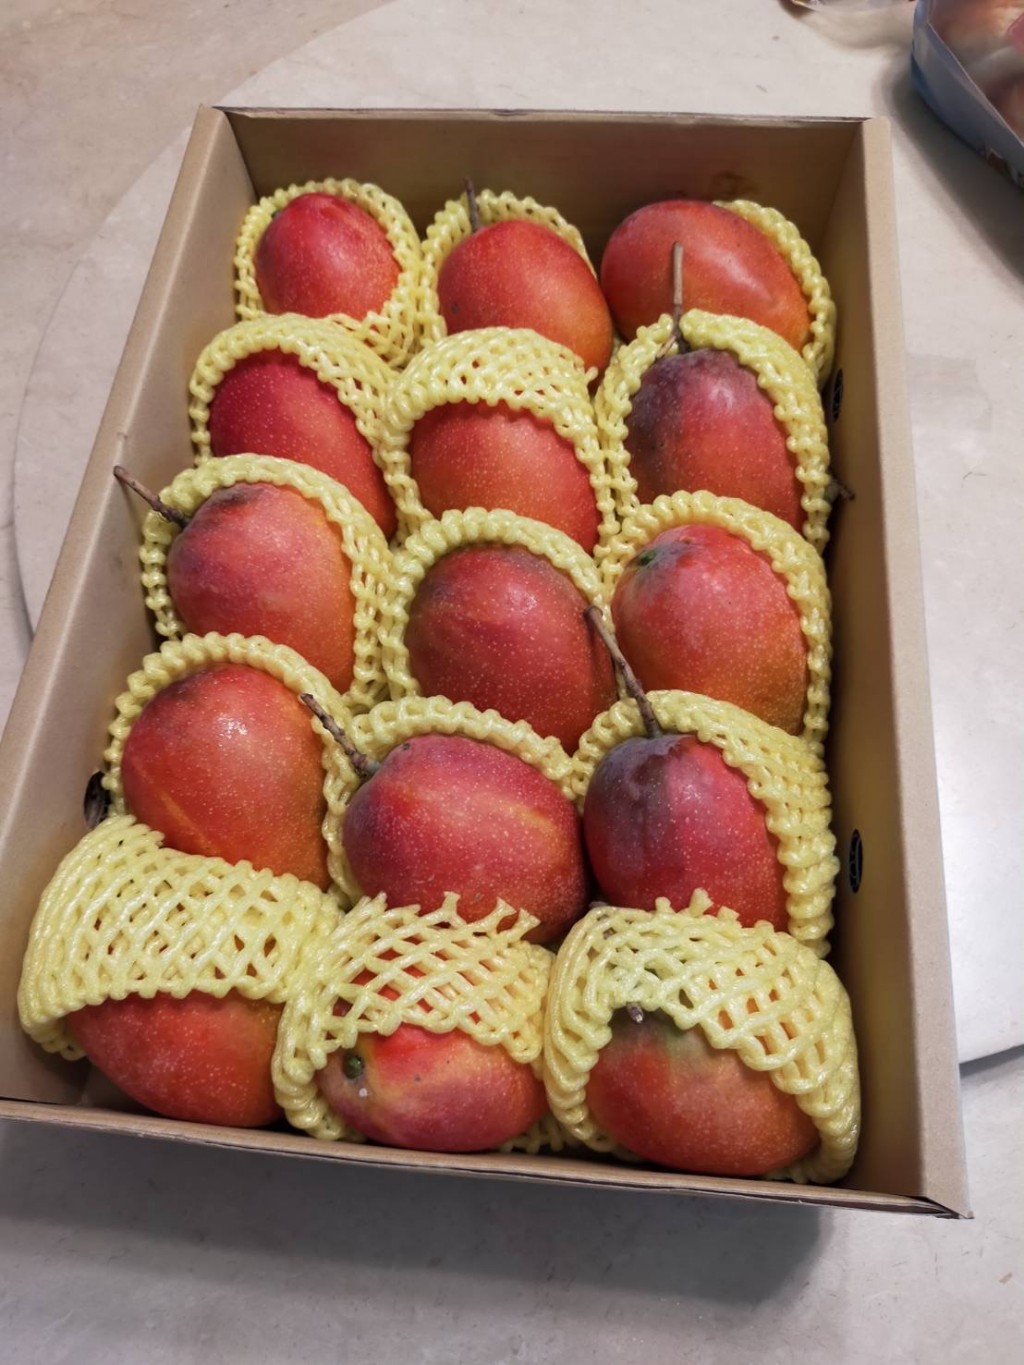 Taiwan produces some of the world's best mangoes. (Taiwan News, Jackie Quartly photo)
